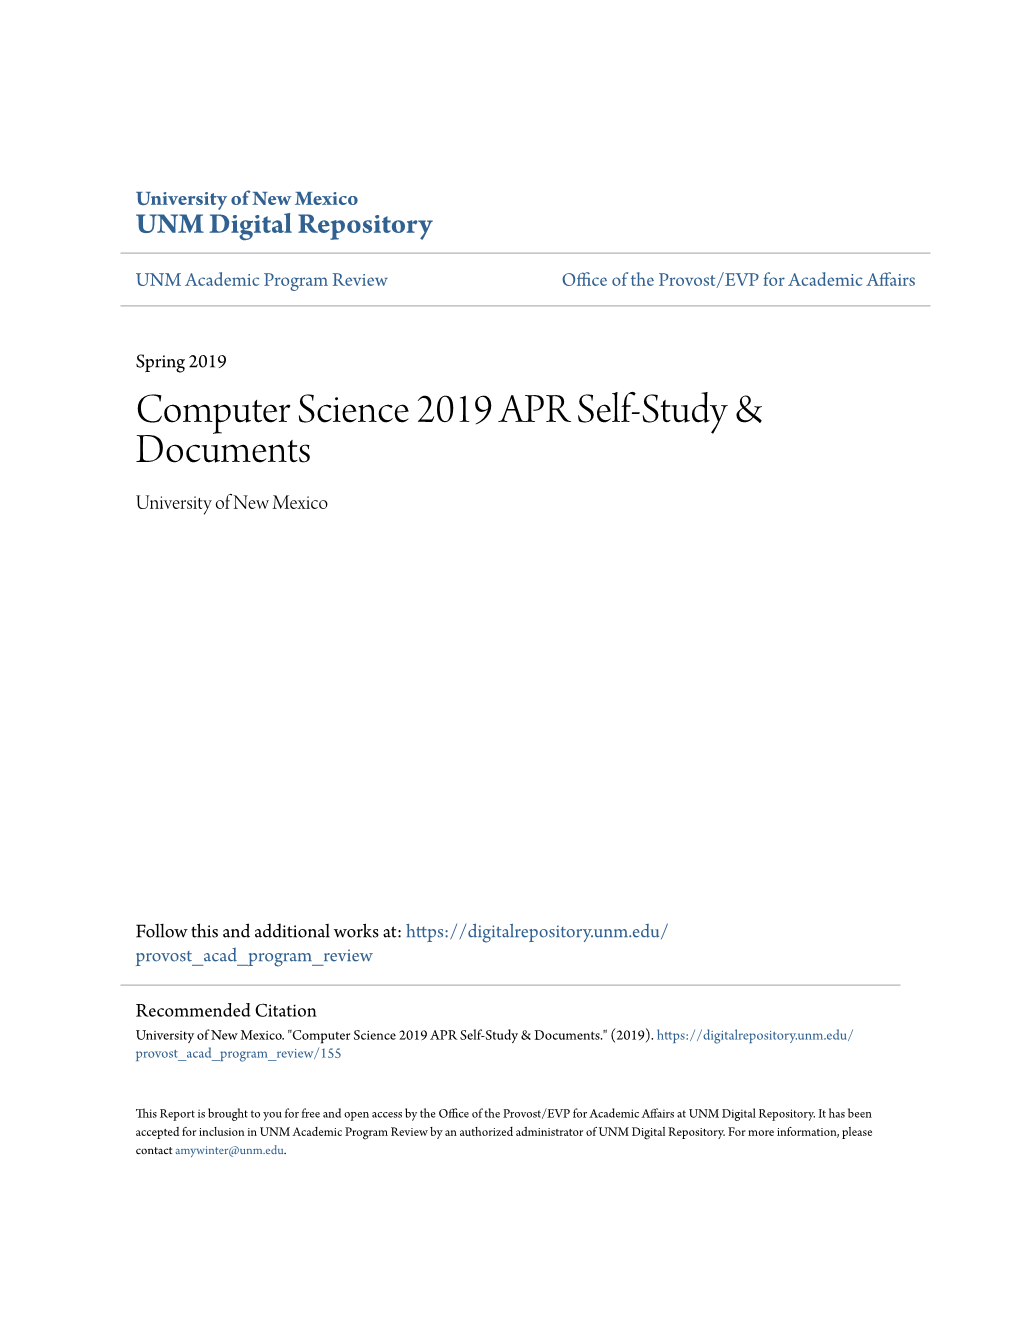 Computer Science 2019 APR Self-Study & Documents